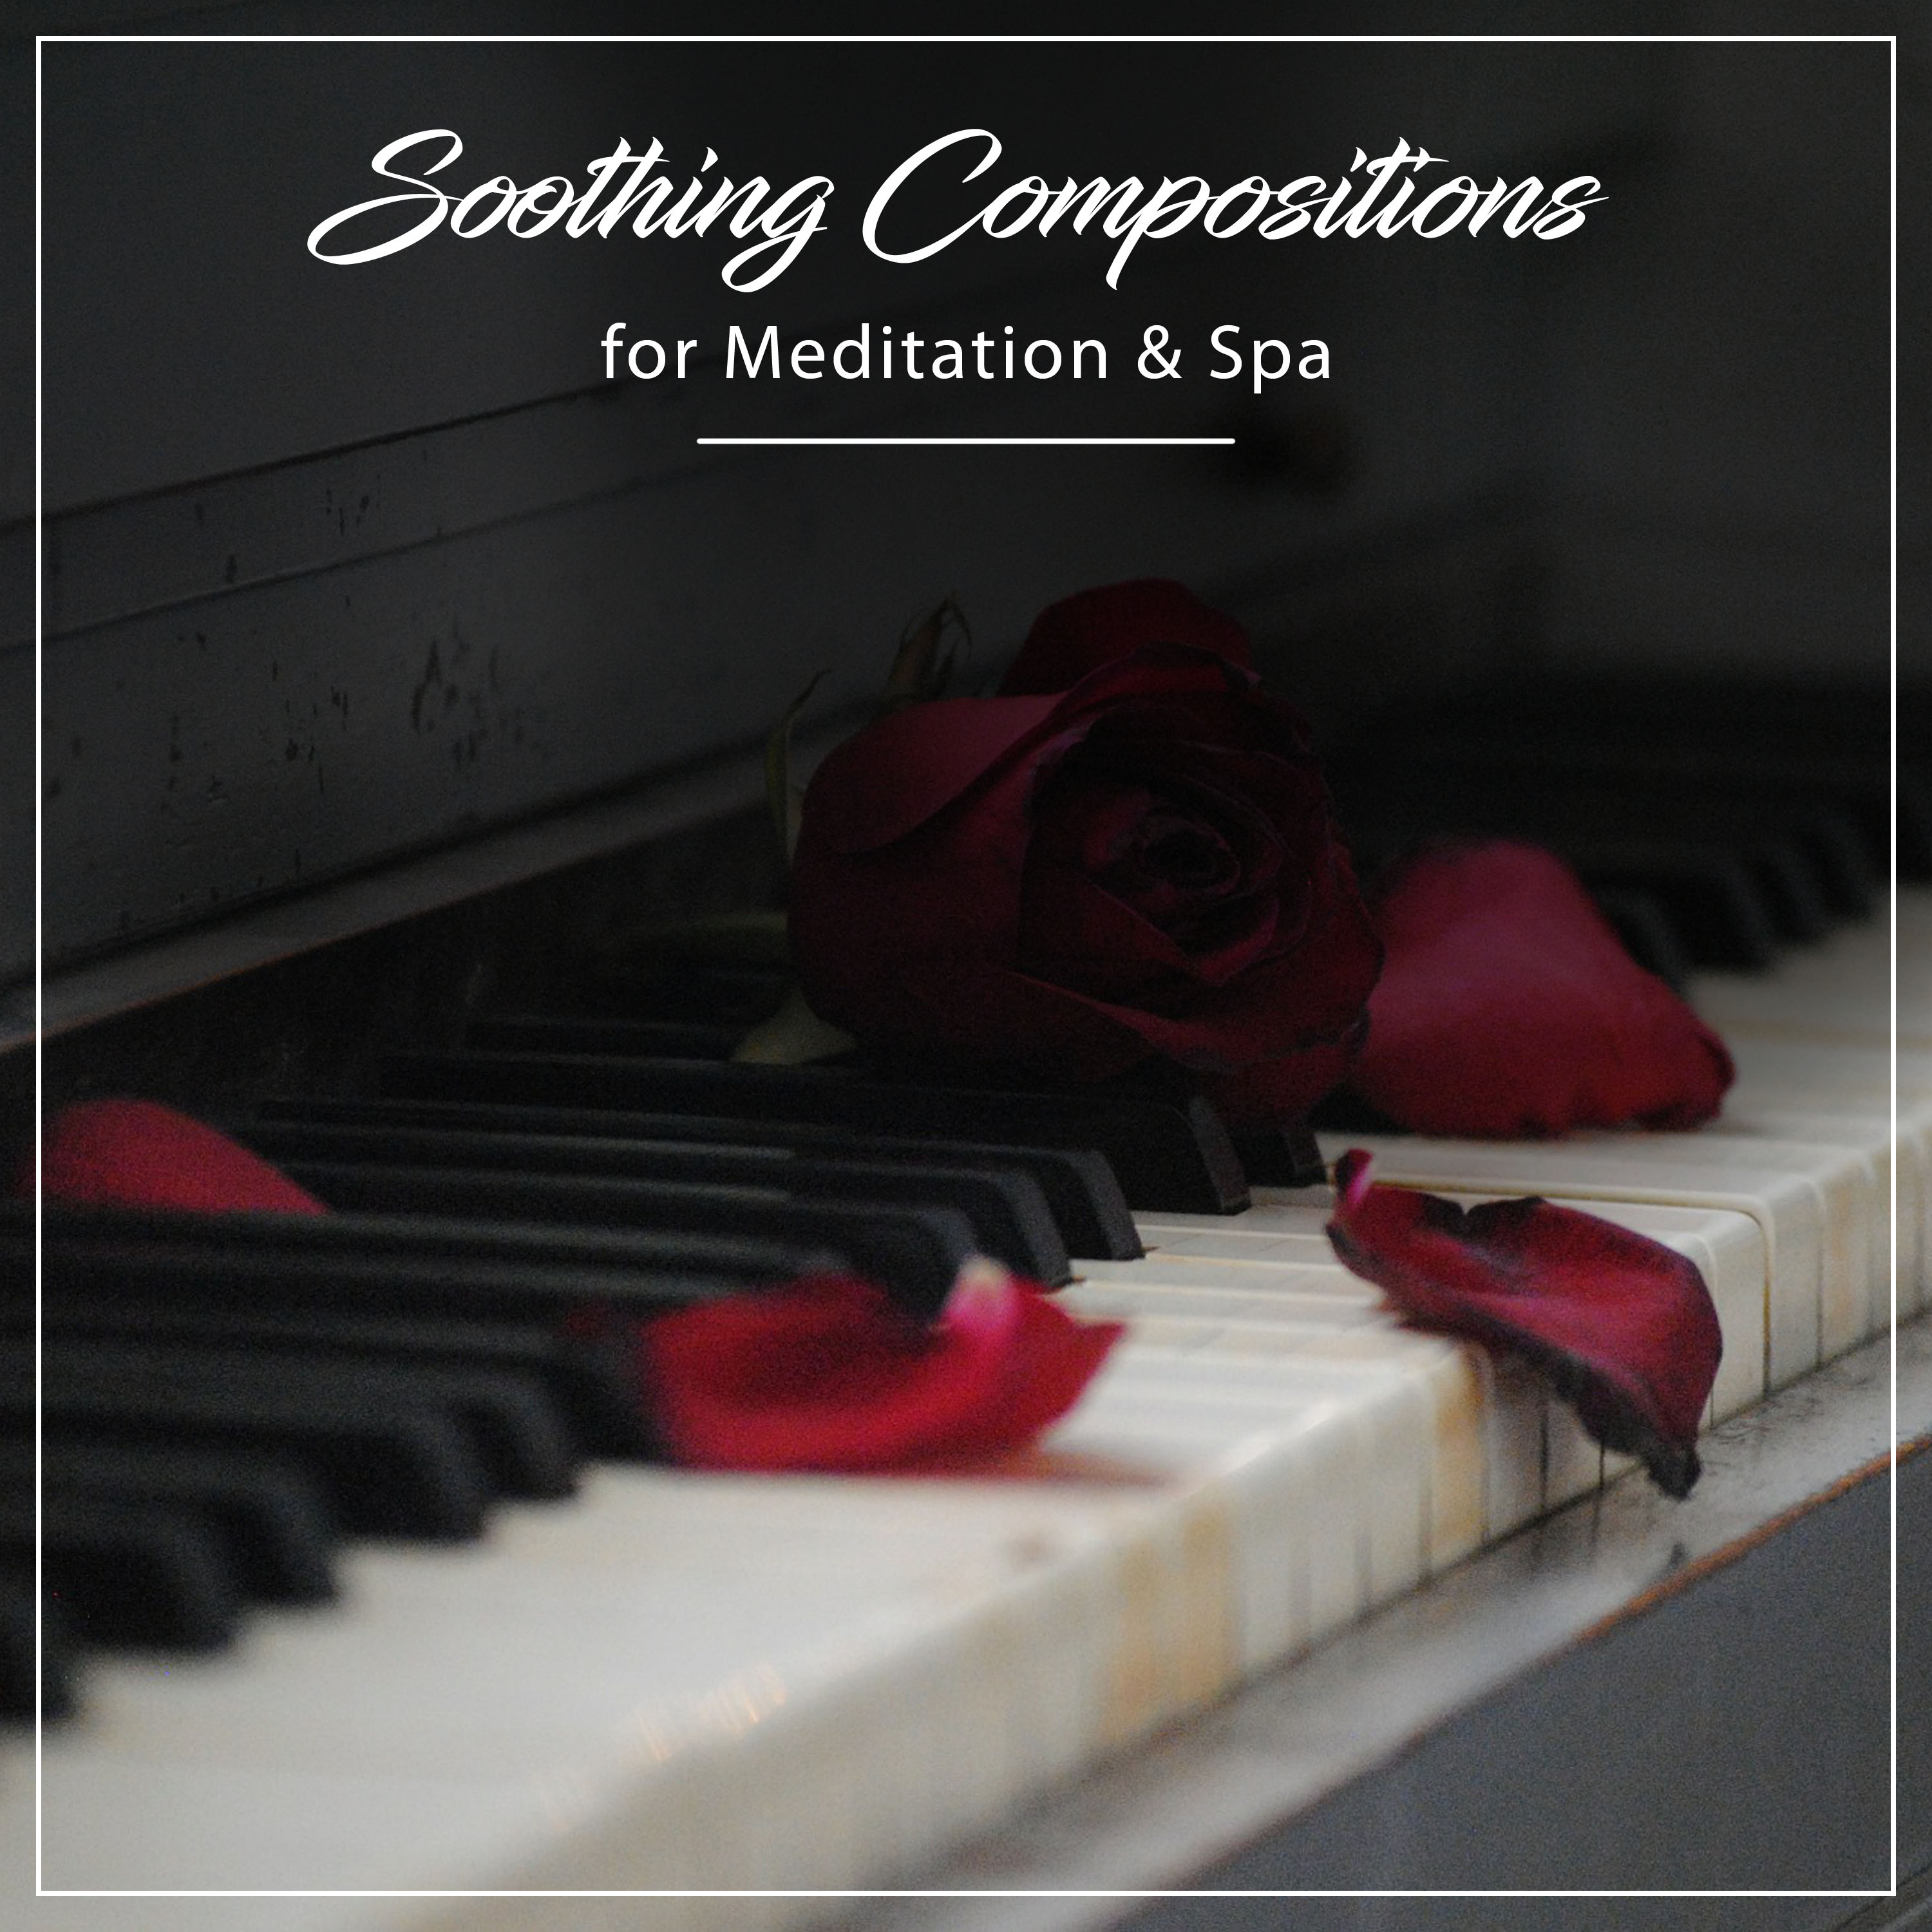 15 of the Greatest Piano Compositions for Meditation and Spa